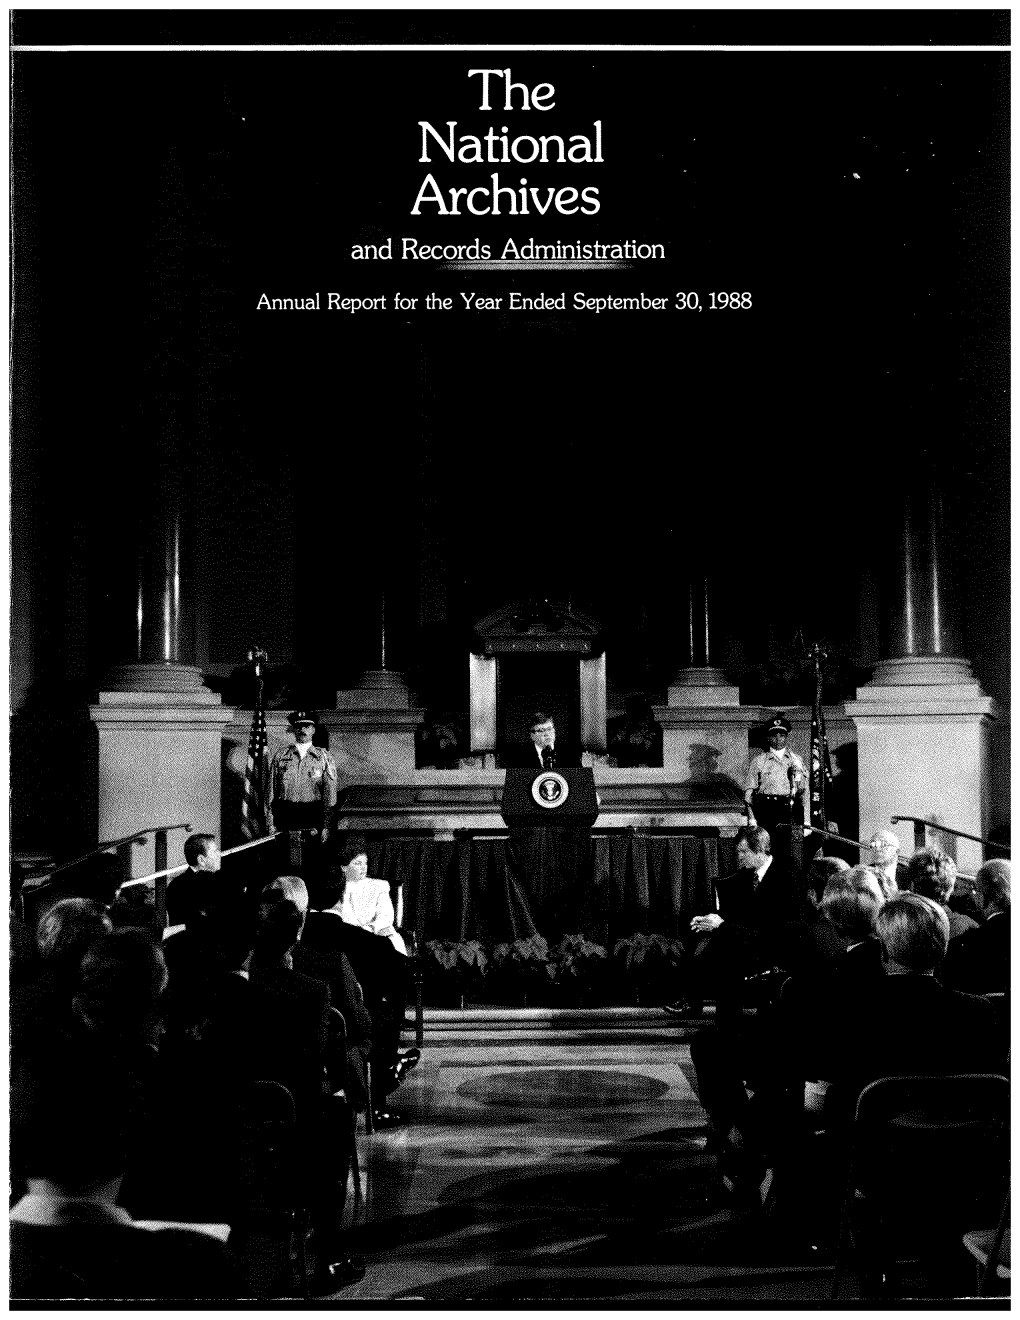 The National Archives and Records Administration Annual Report, 1988